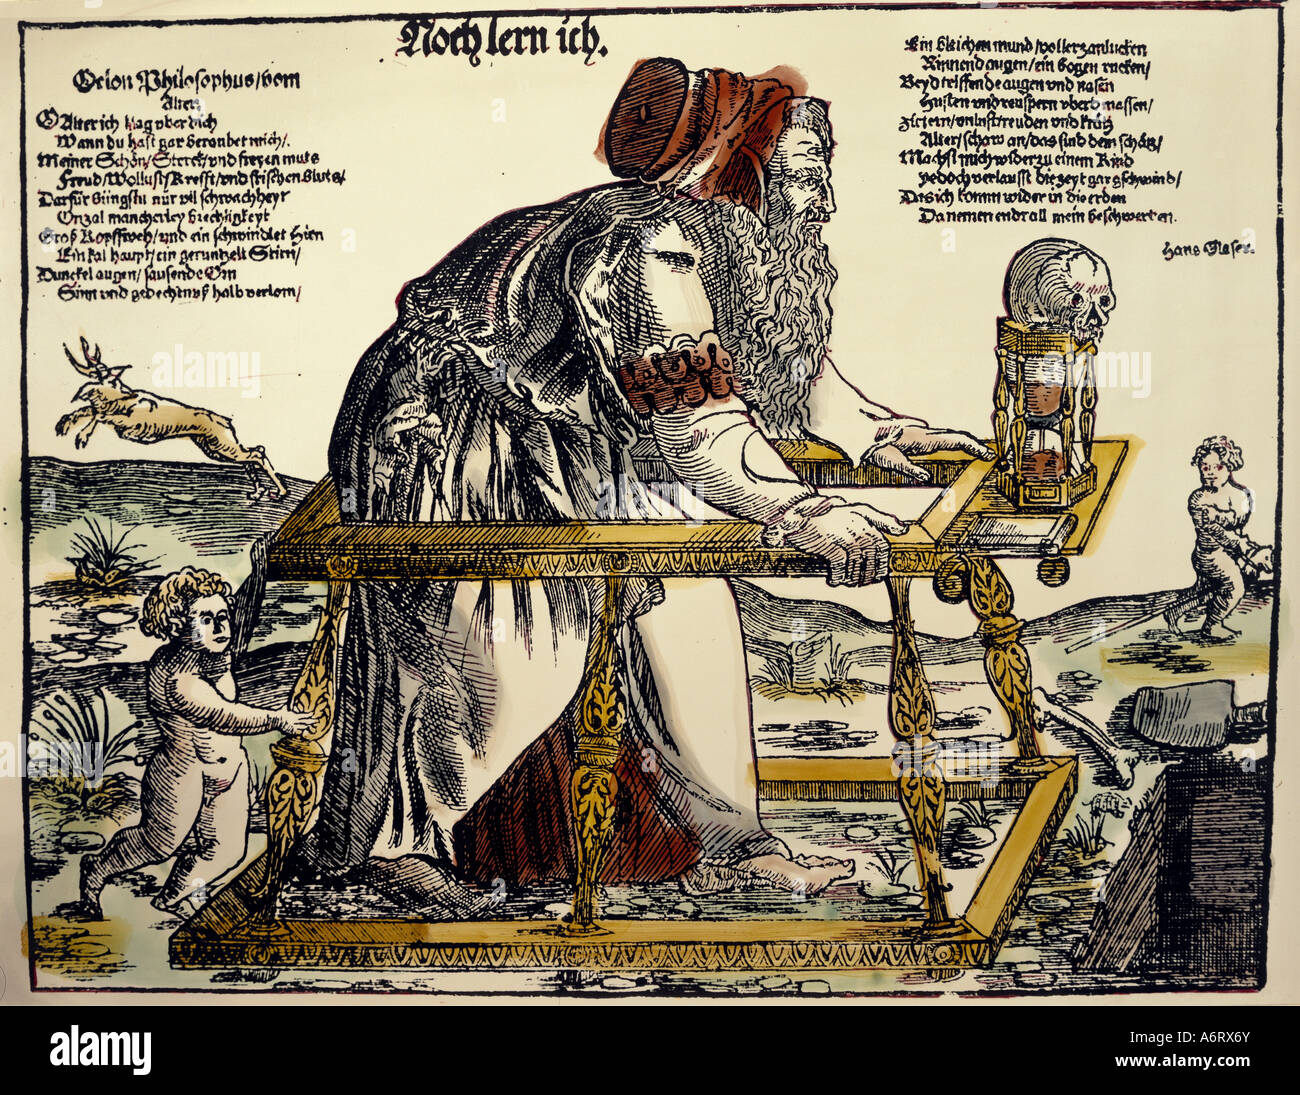 allegory, ages, "Still learning", woodcut by Hans Glaser, Nuremberg, 16th , Stock Photo